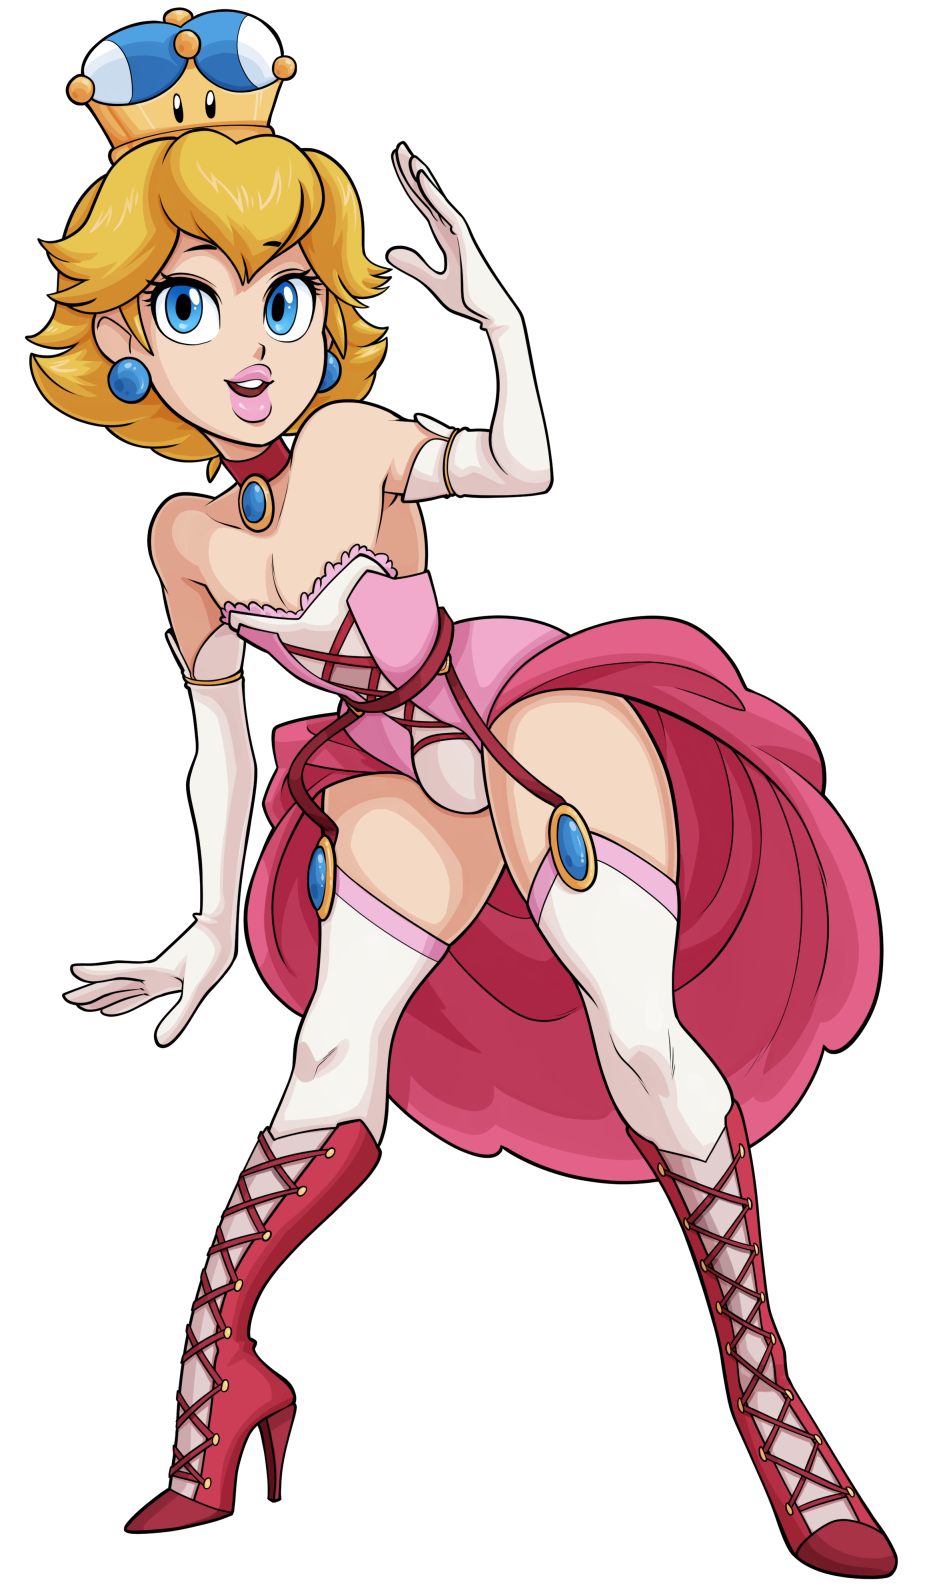 bunnox: Super Crown but it turns you into a femboy? Yes plz. Prince Peach femboy